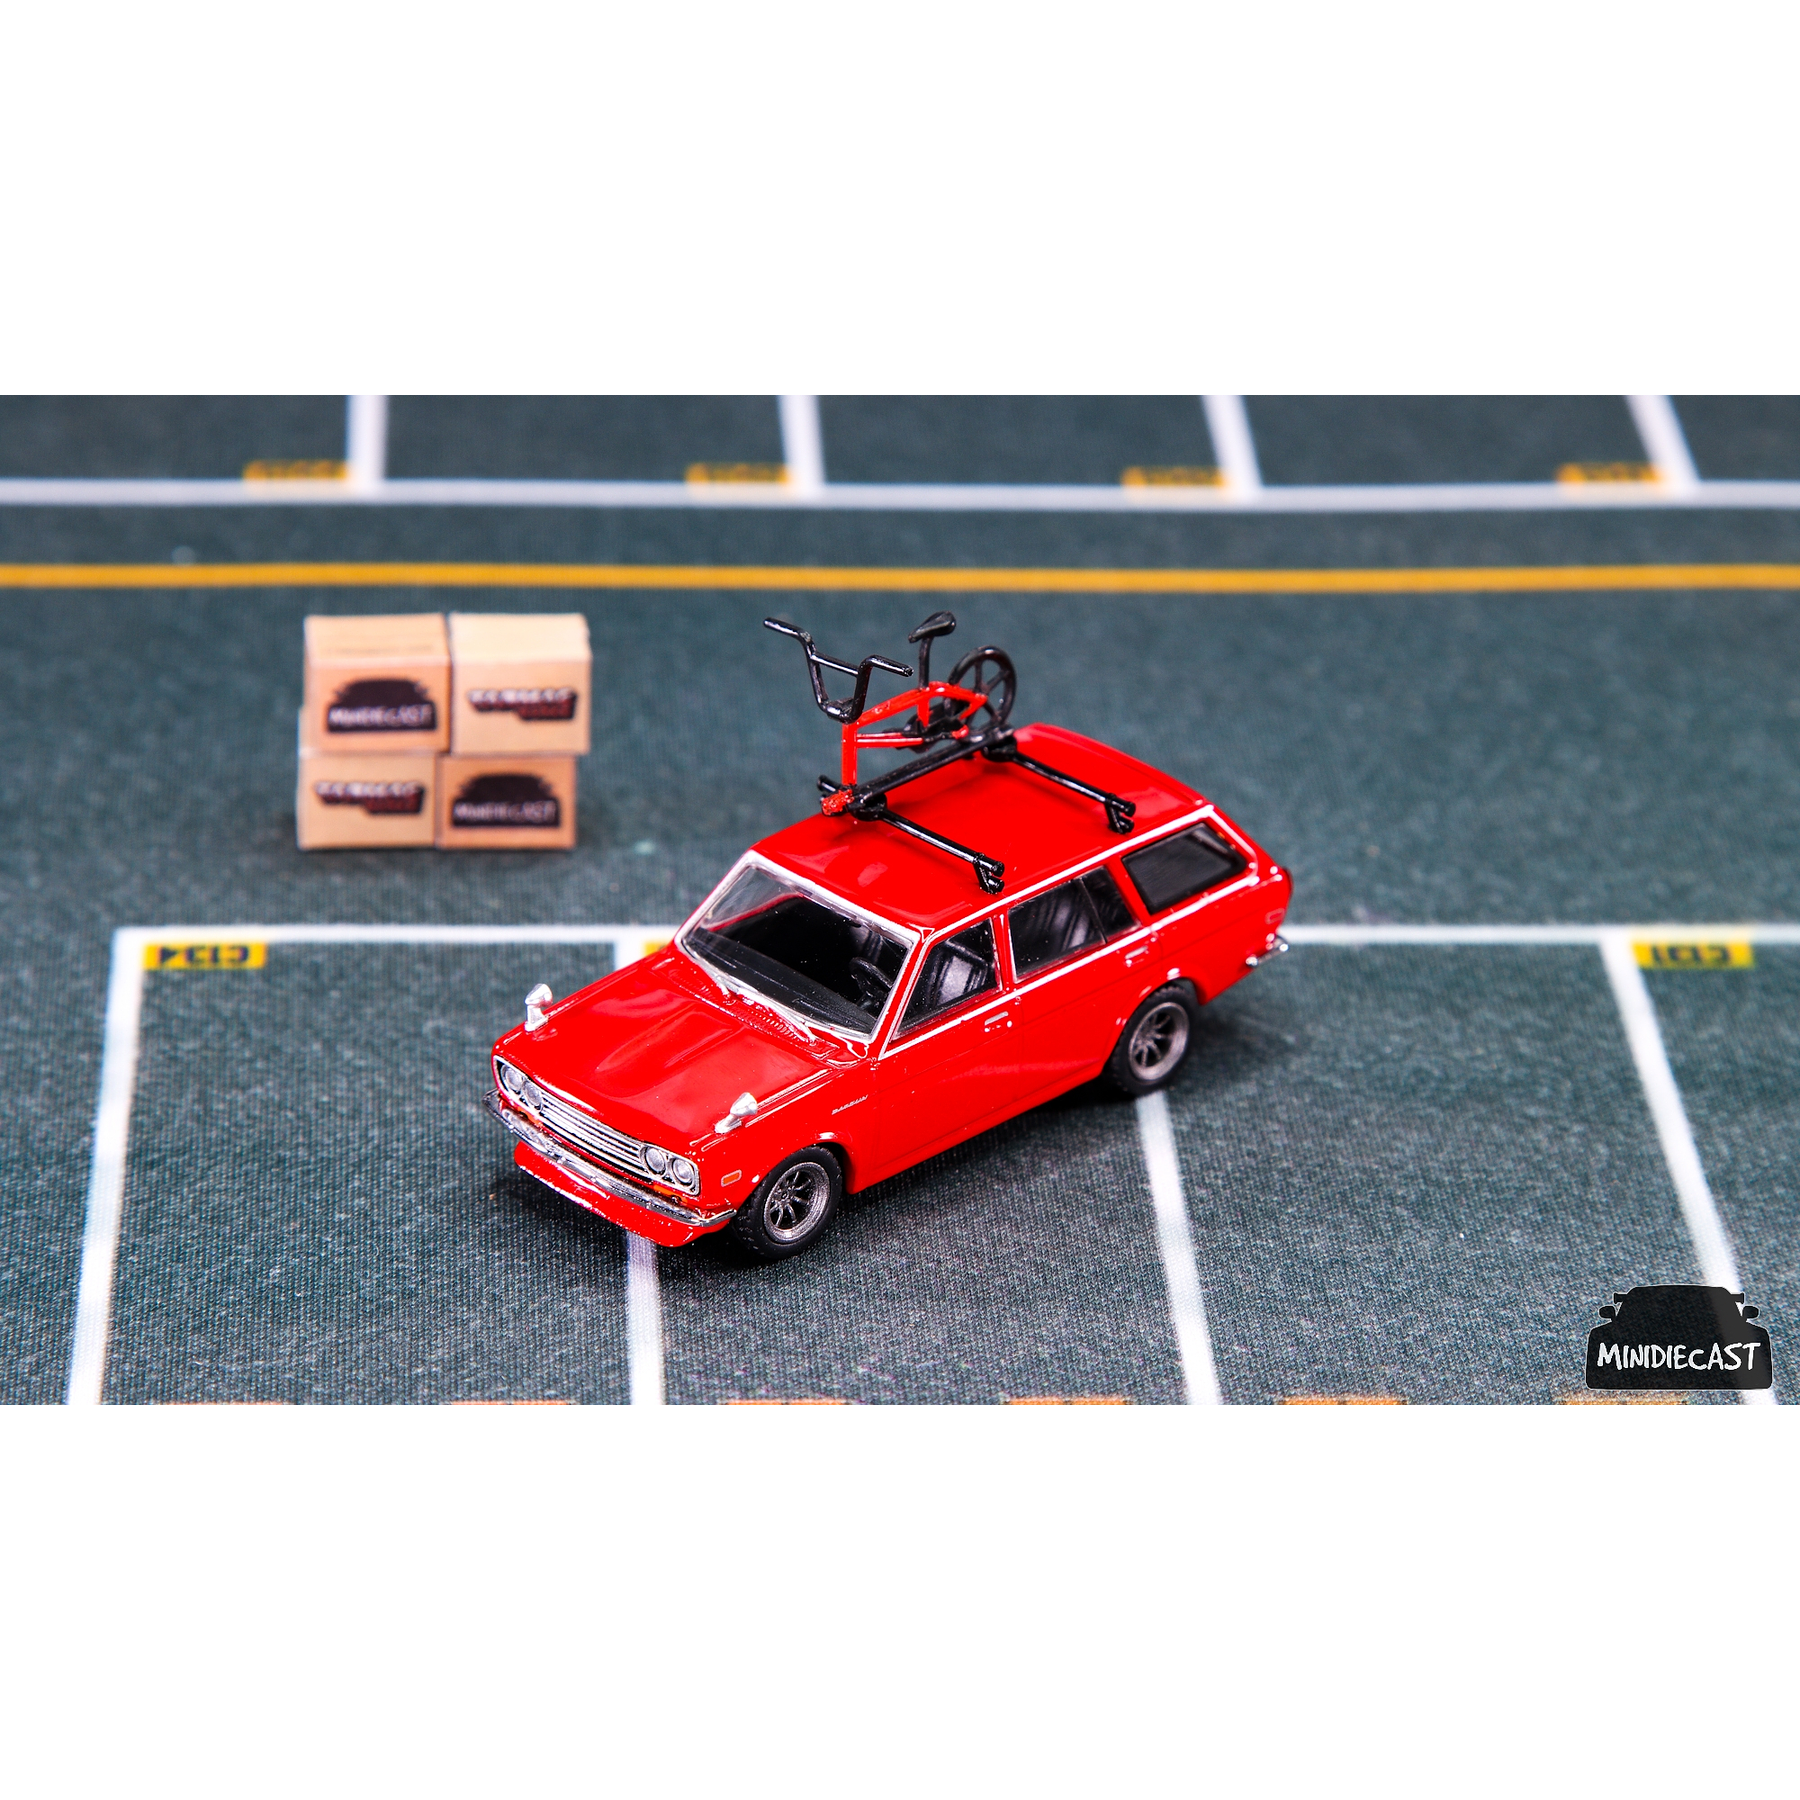 Tarmac Works 1:64 Datsun Bluebird 510 Wagon Red Bicycle with roof rack included